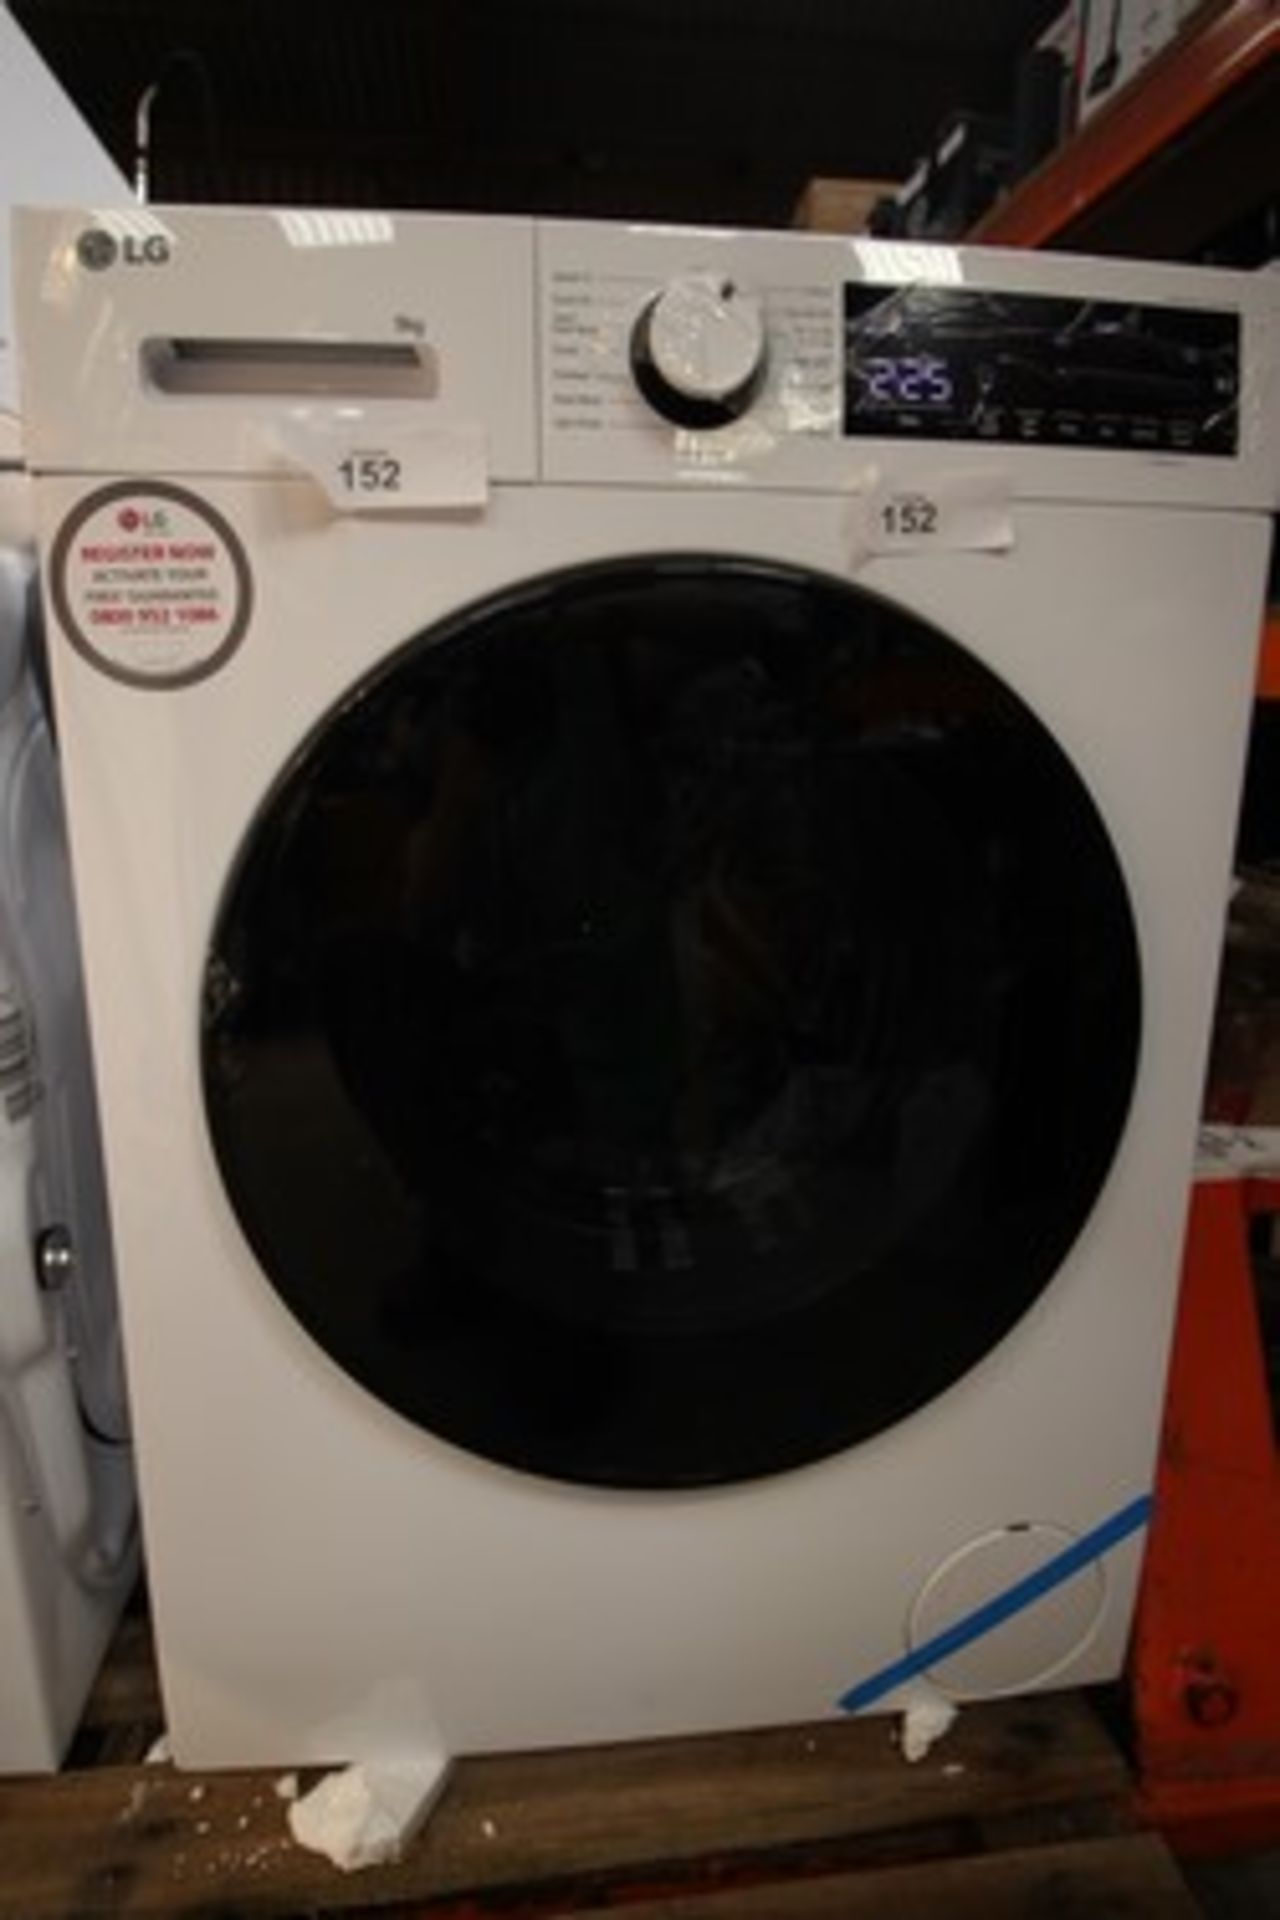 1 x LG 9kg washing machine, Model F4T209WSE, powers on ok but not fully tested - New (ES9)